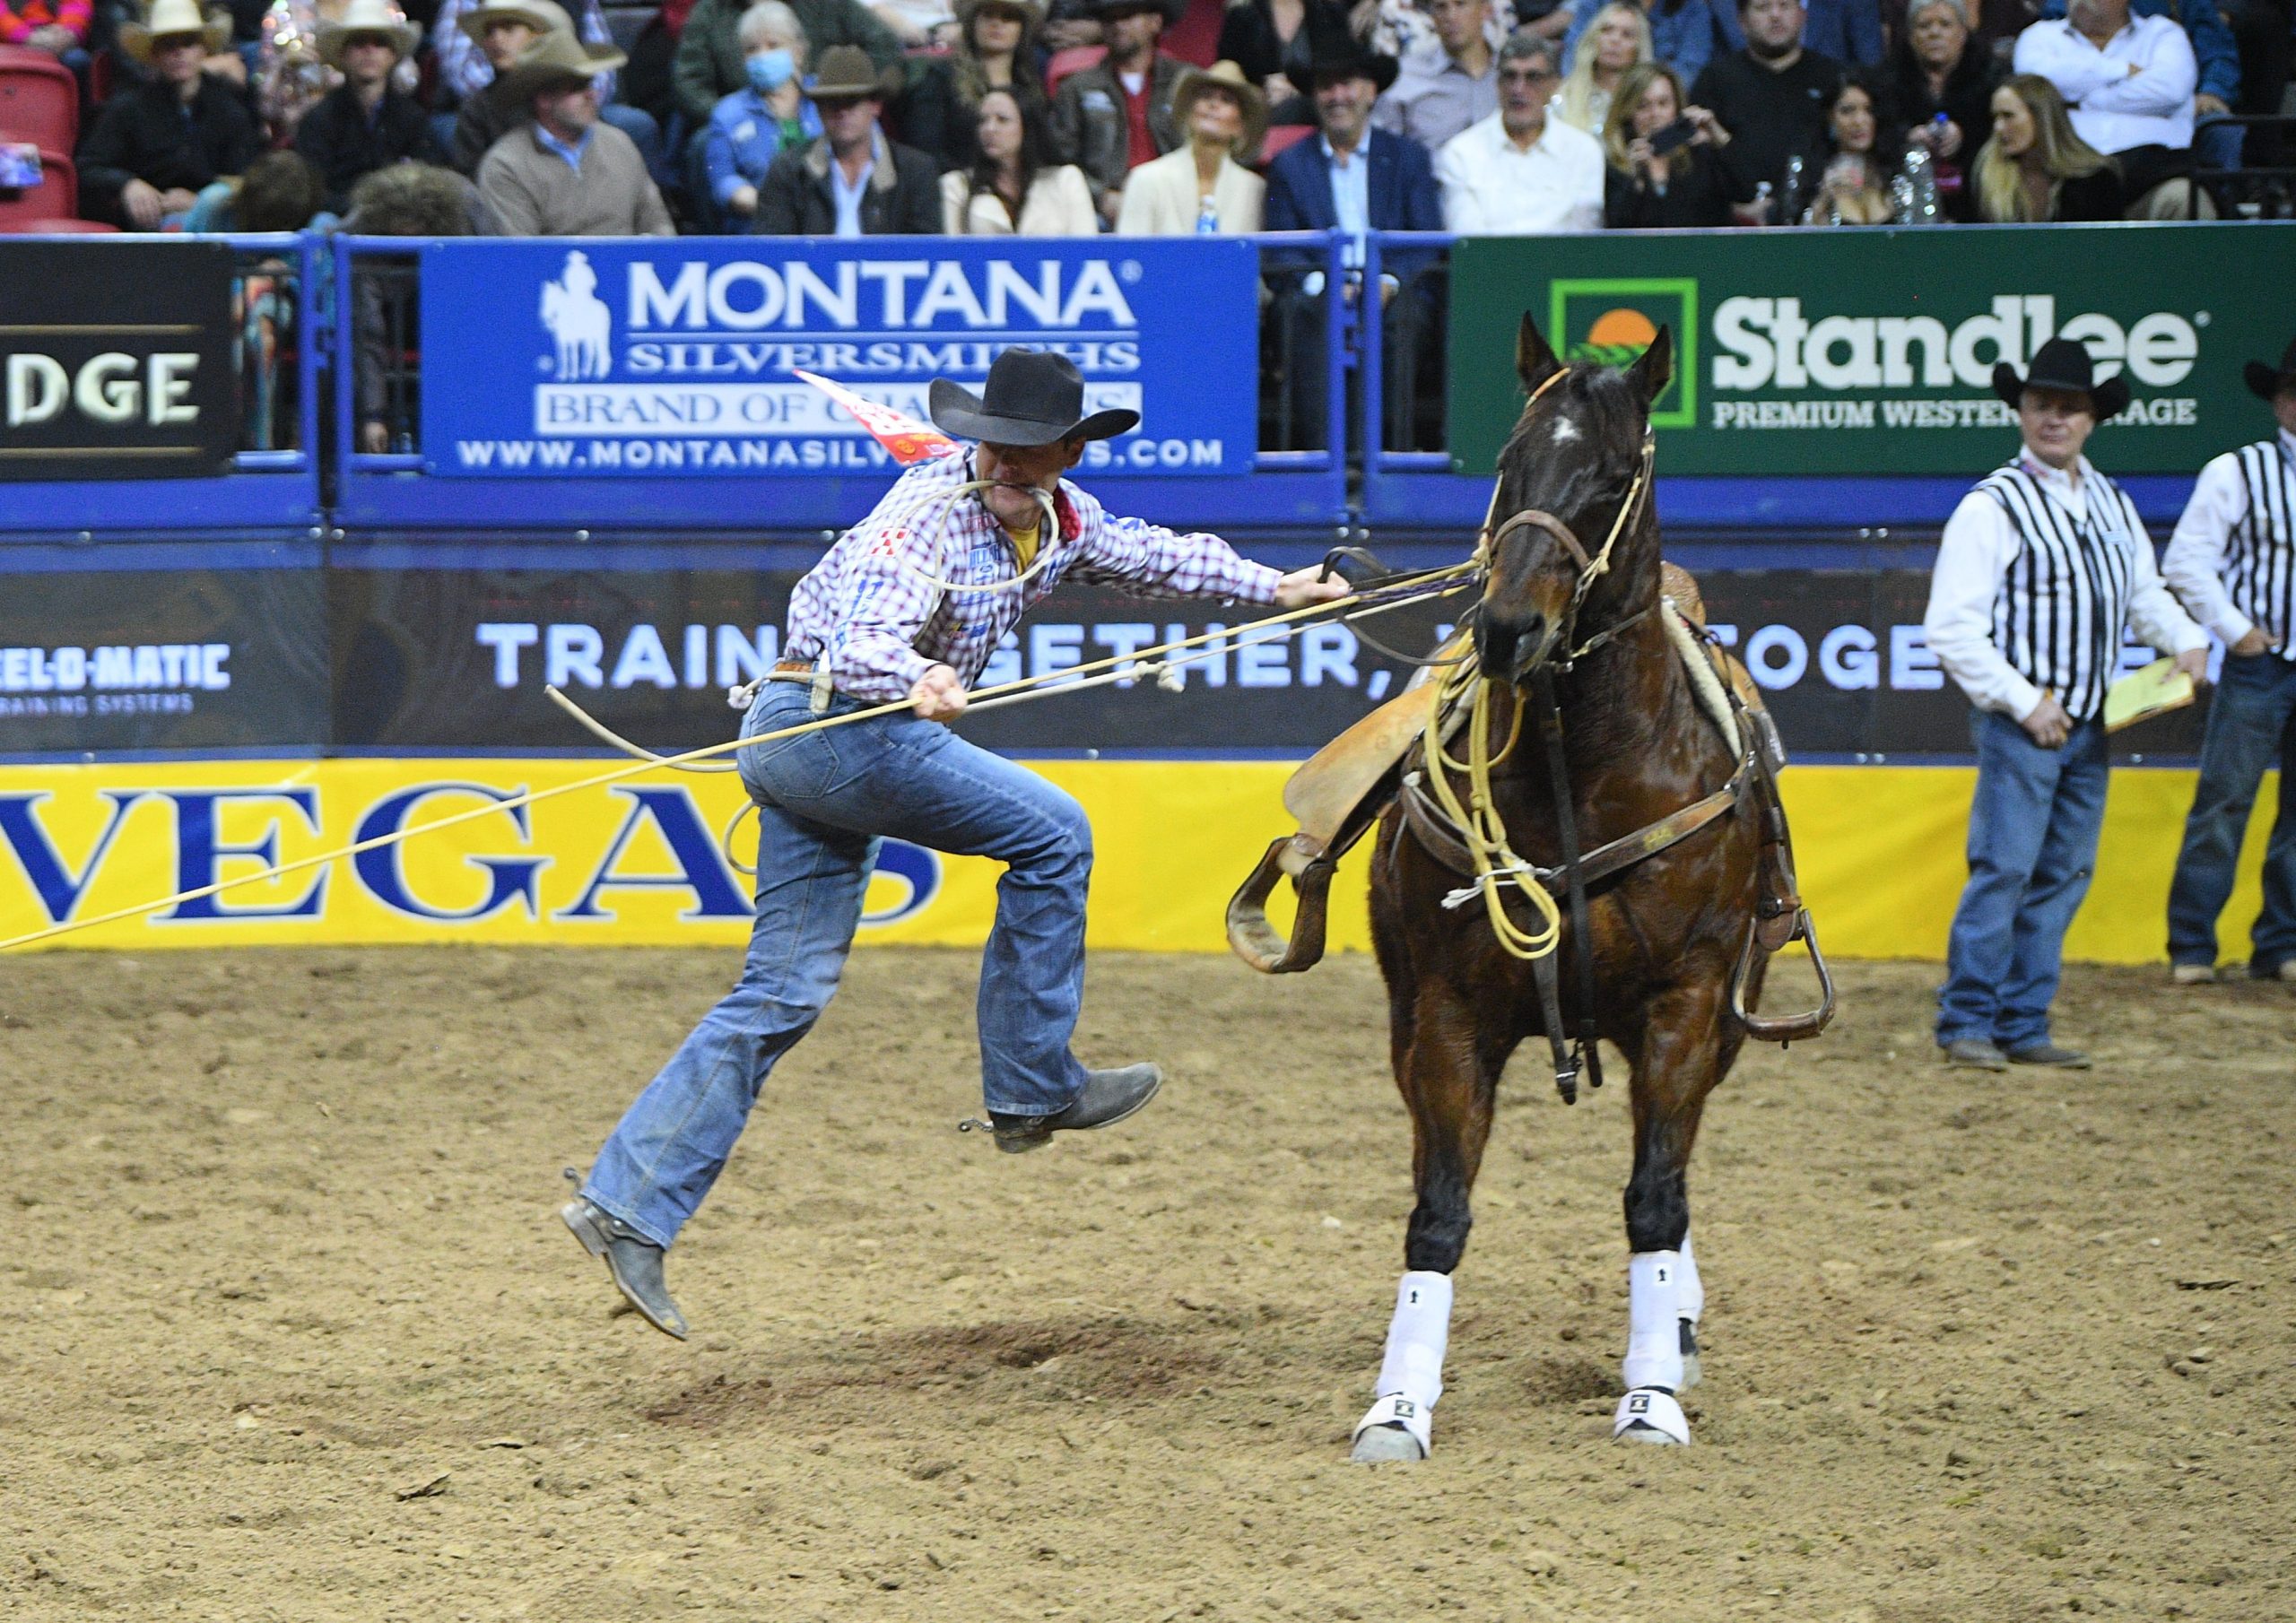 Caleb Smidt Roping at the NFR